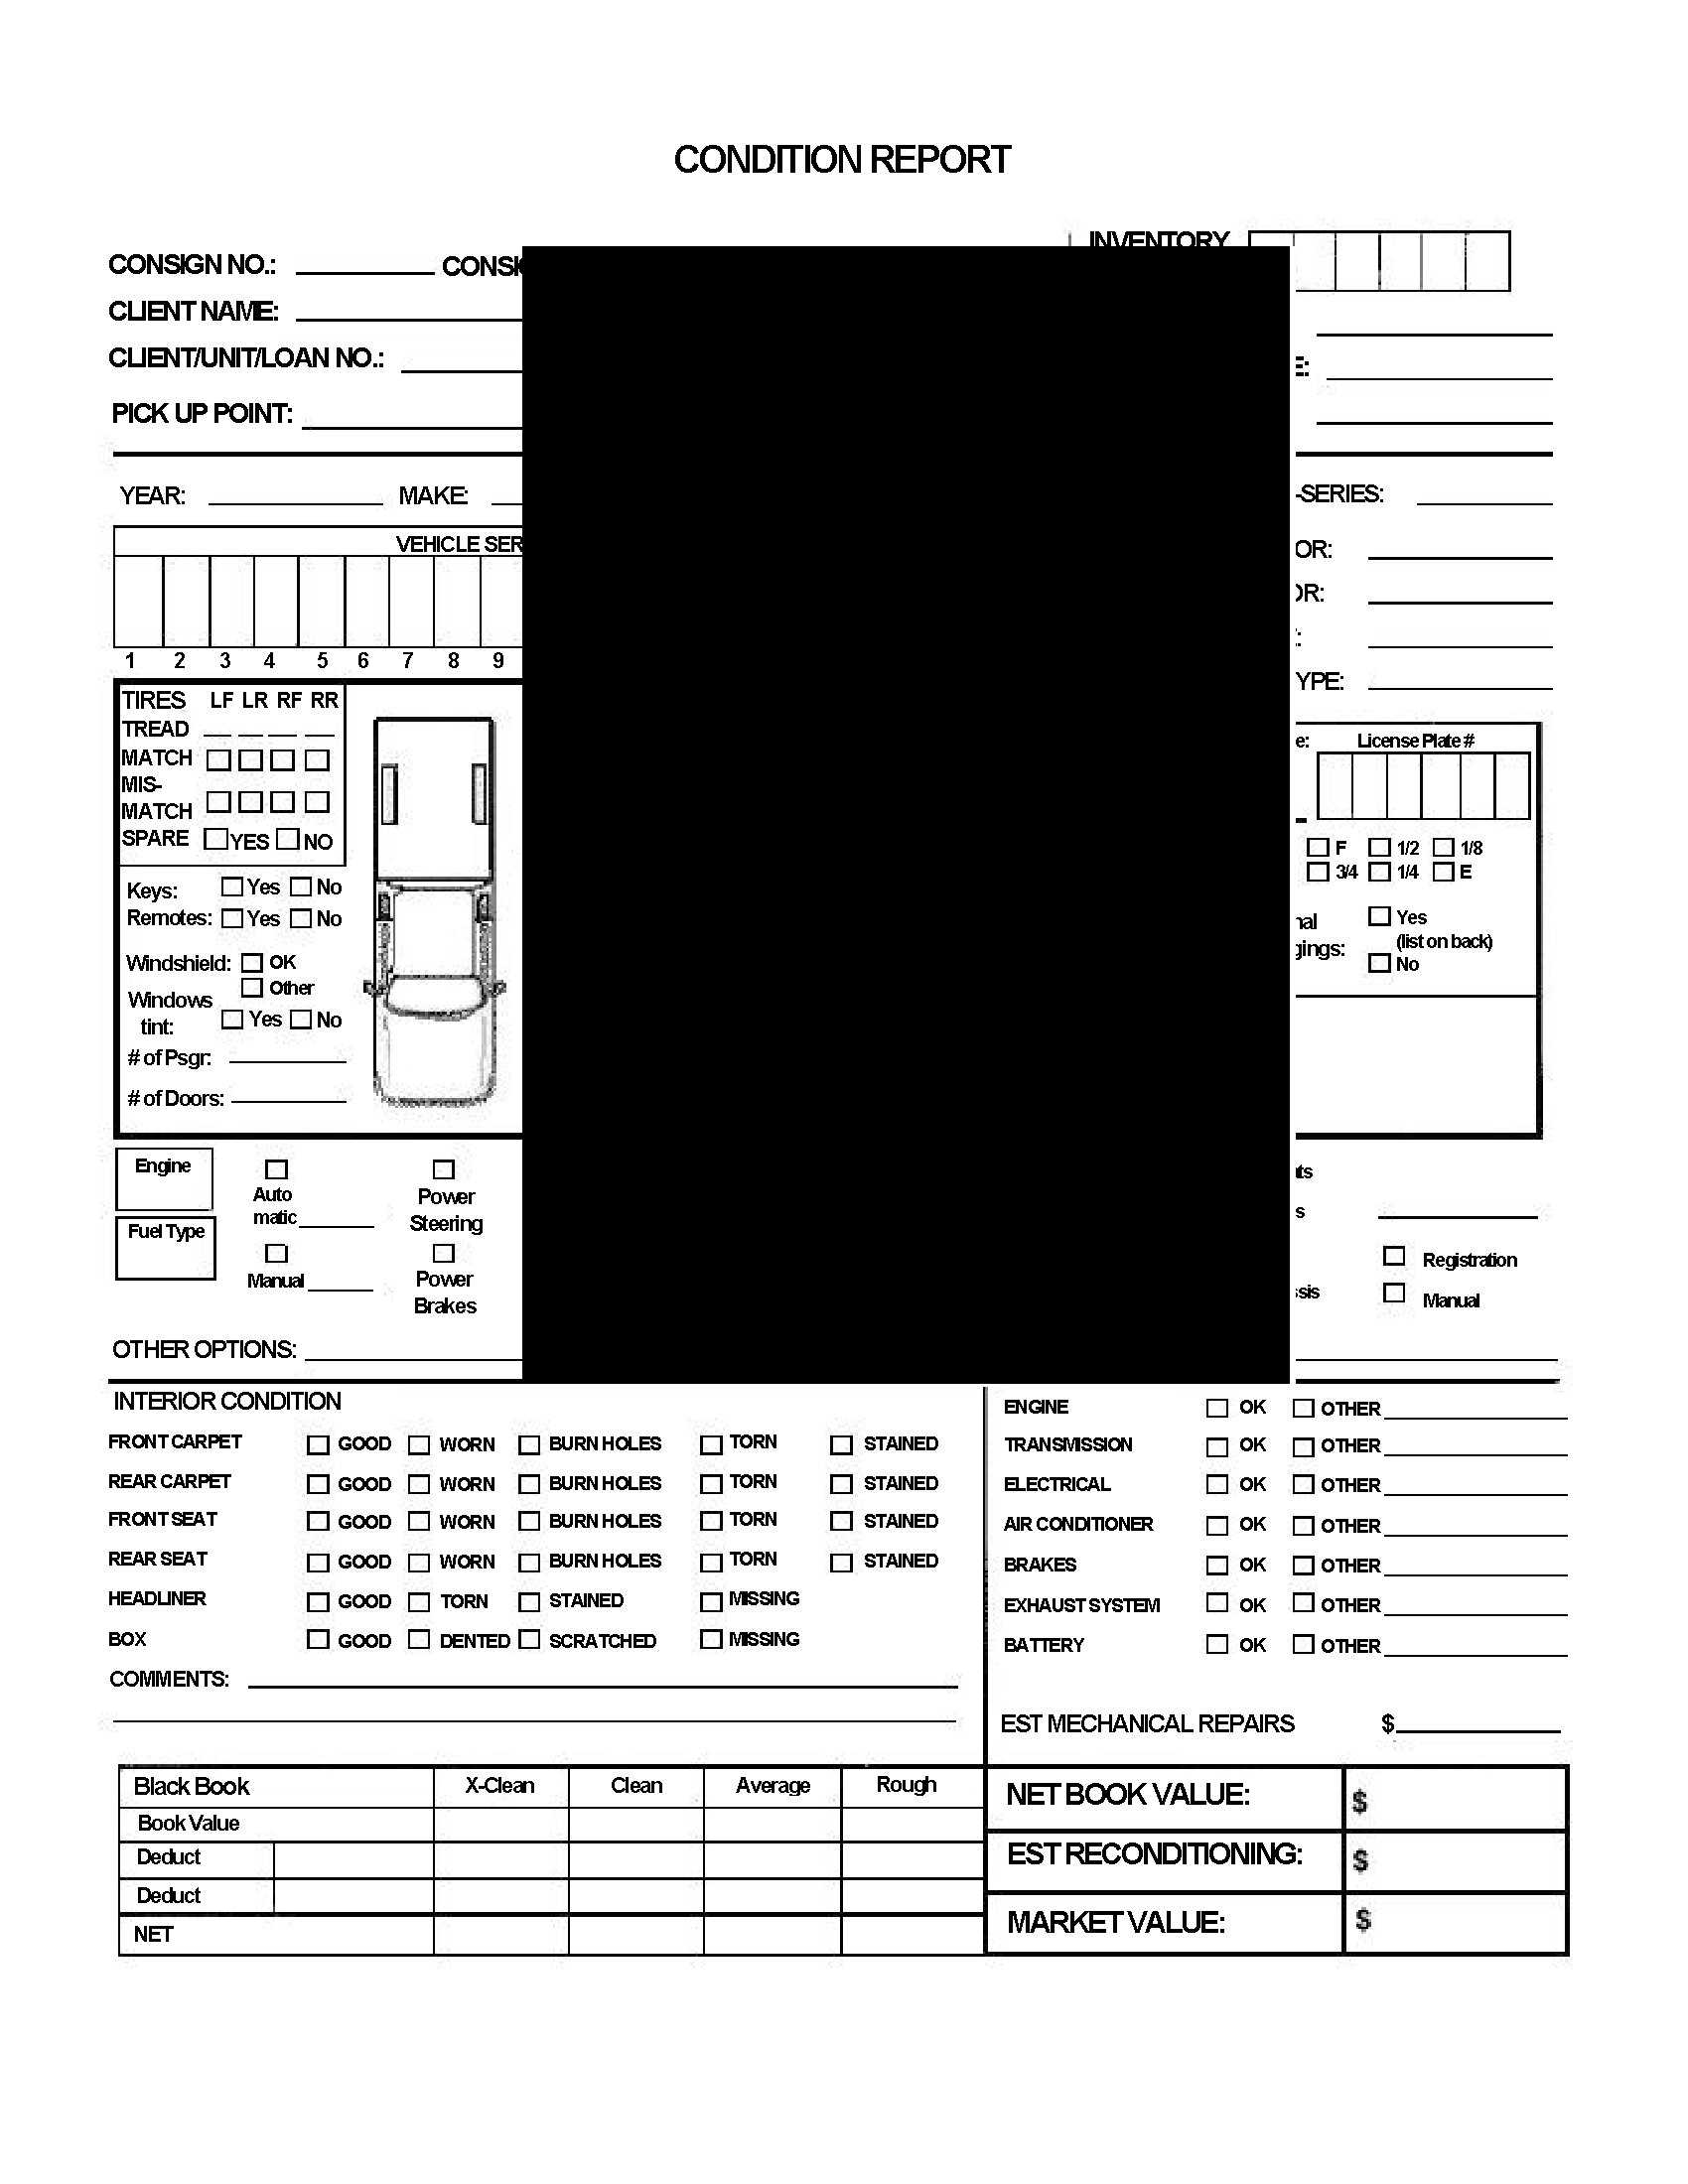 Truck Condition Report Template – 28 Images – Truck Intended For Truck Condition Report Template